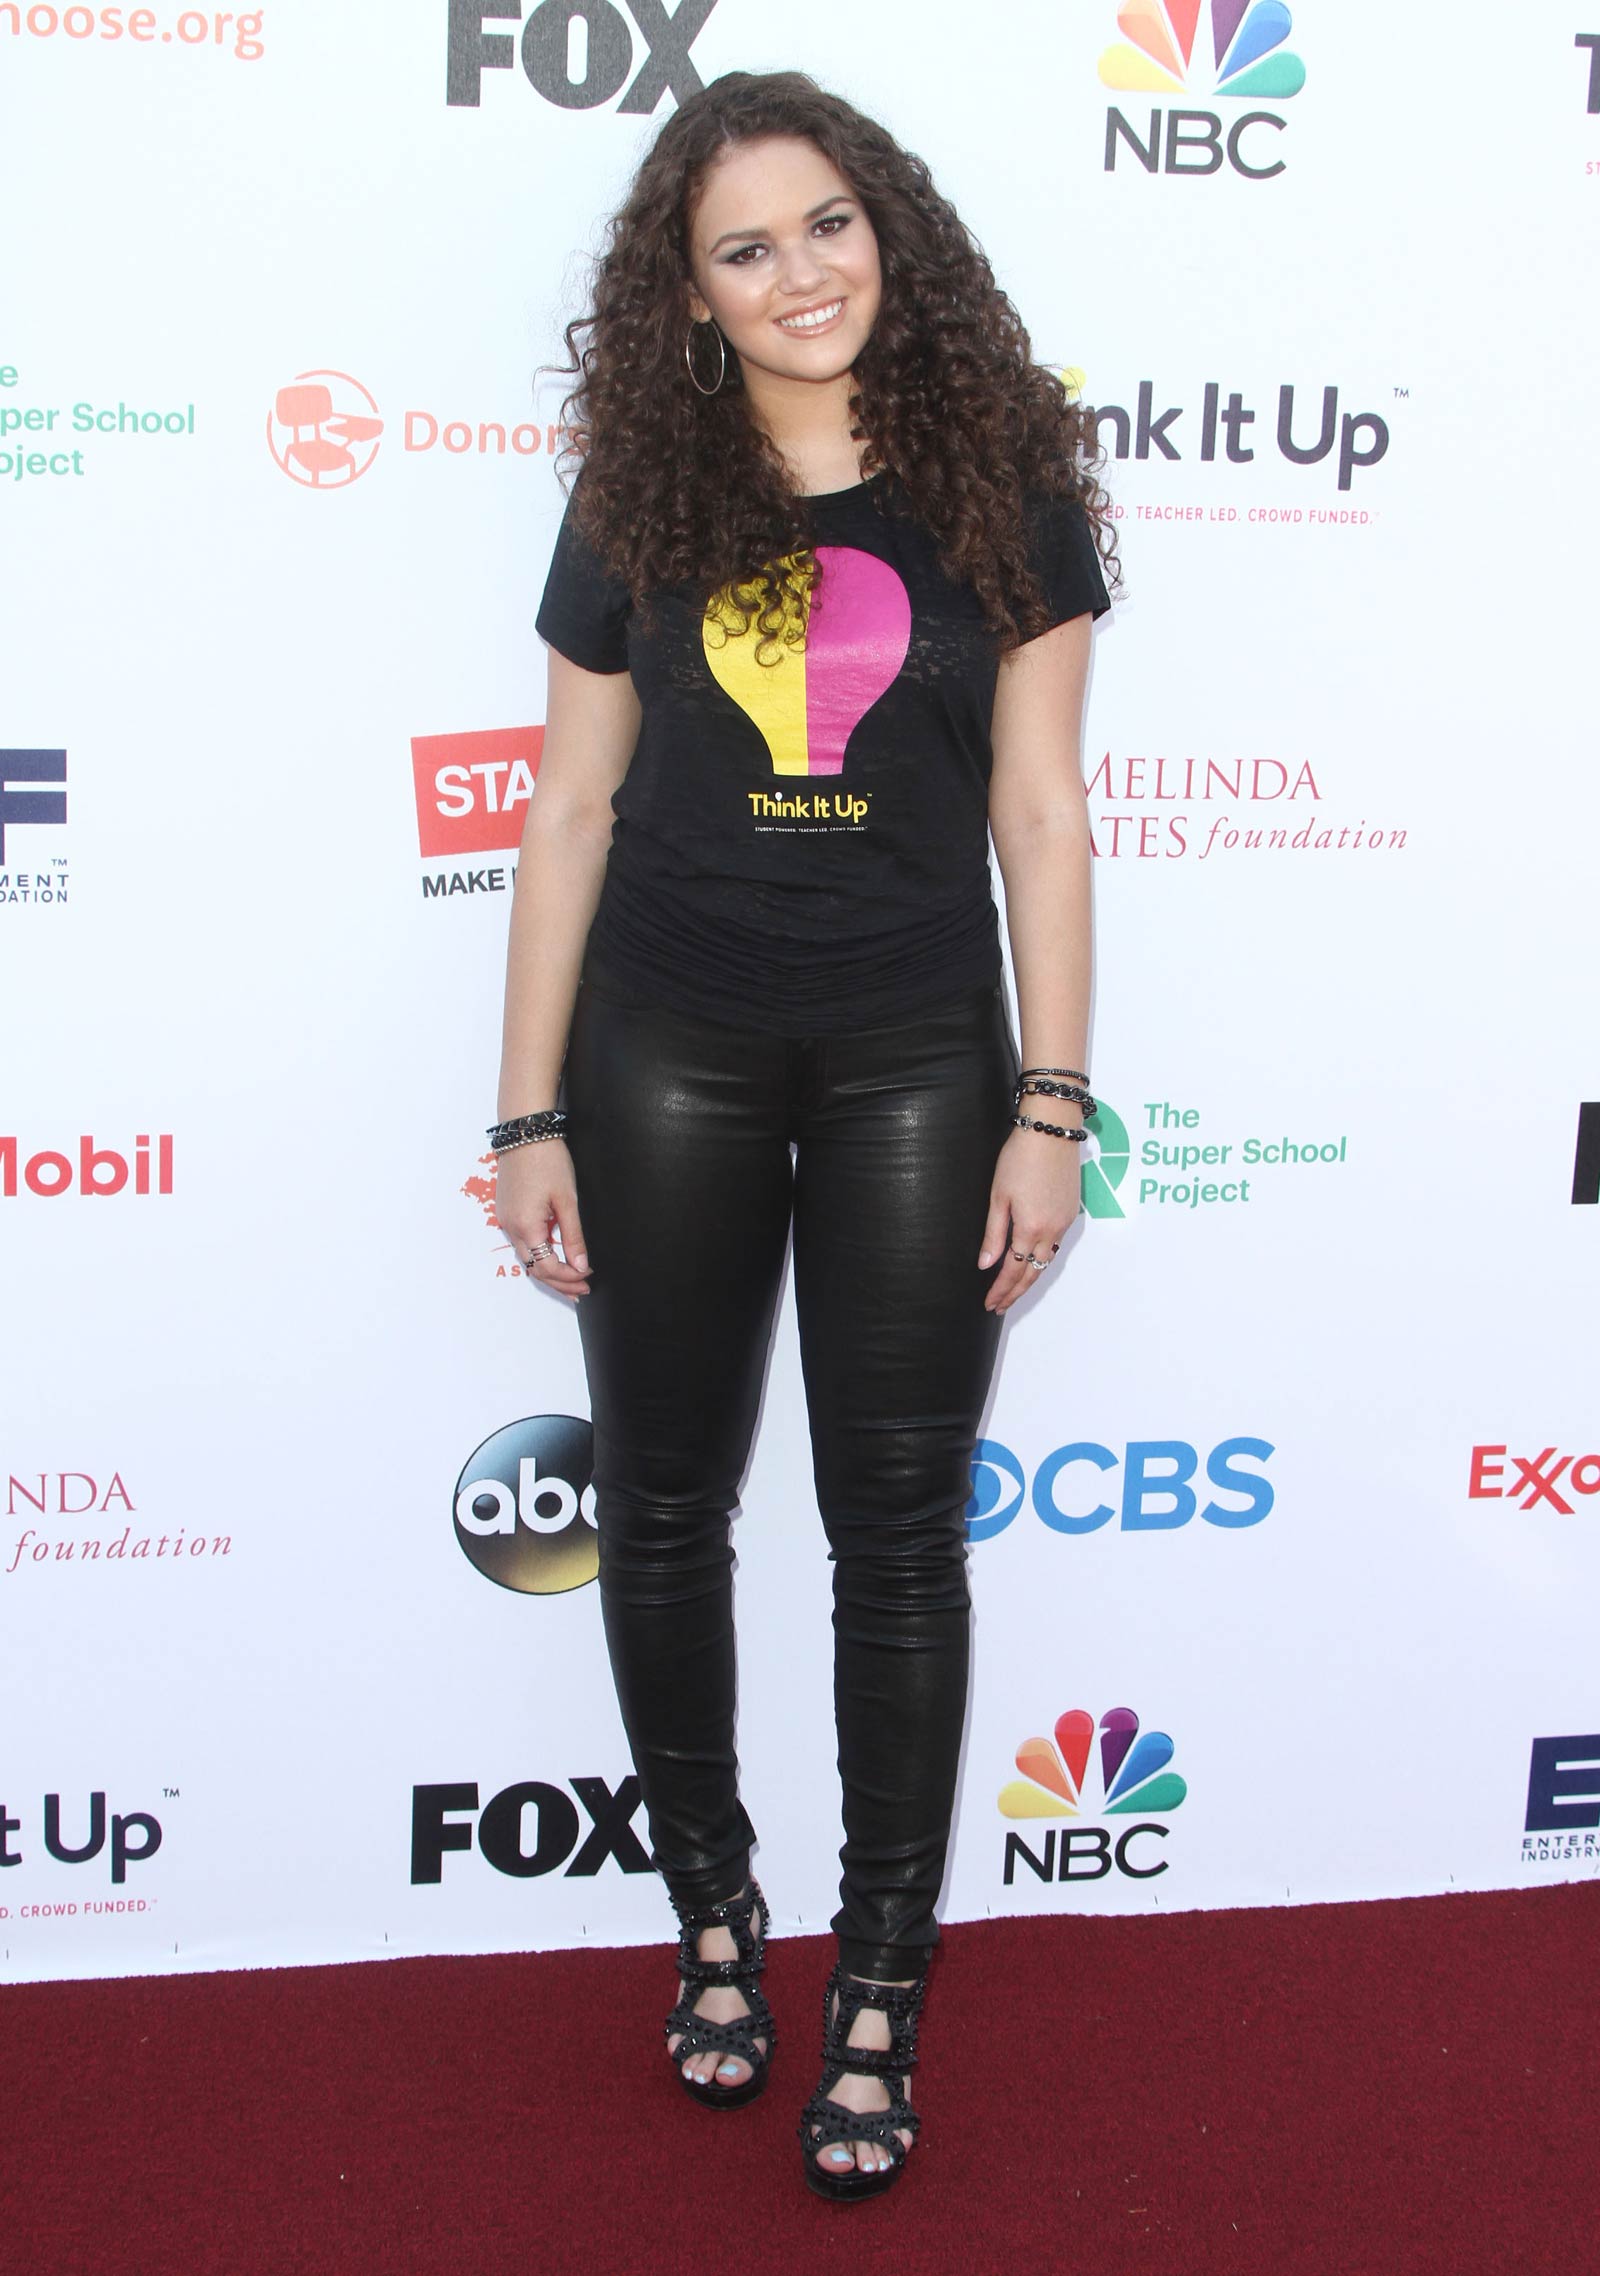 Madison Pettis attends Think It Up Education Initiative Telecast